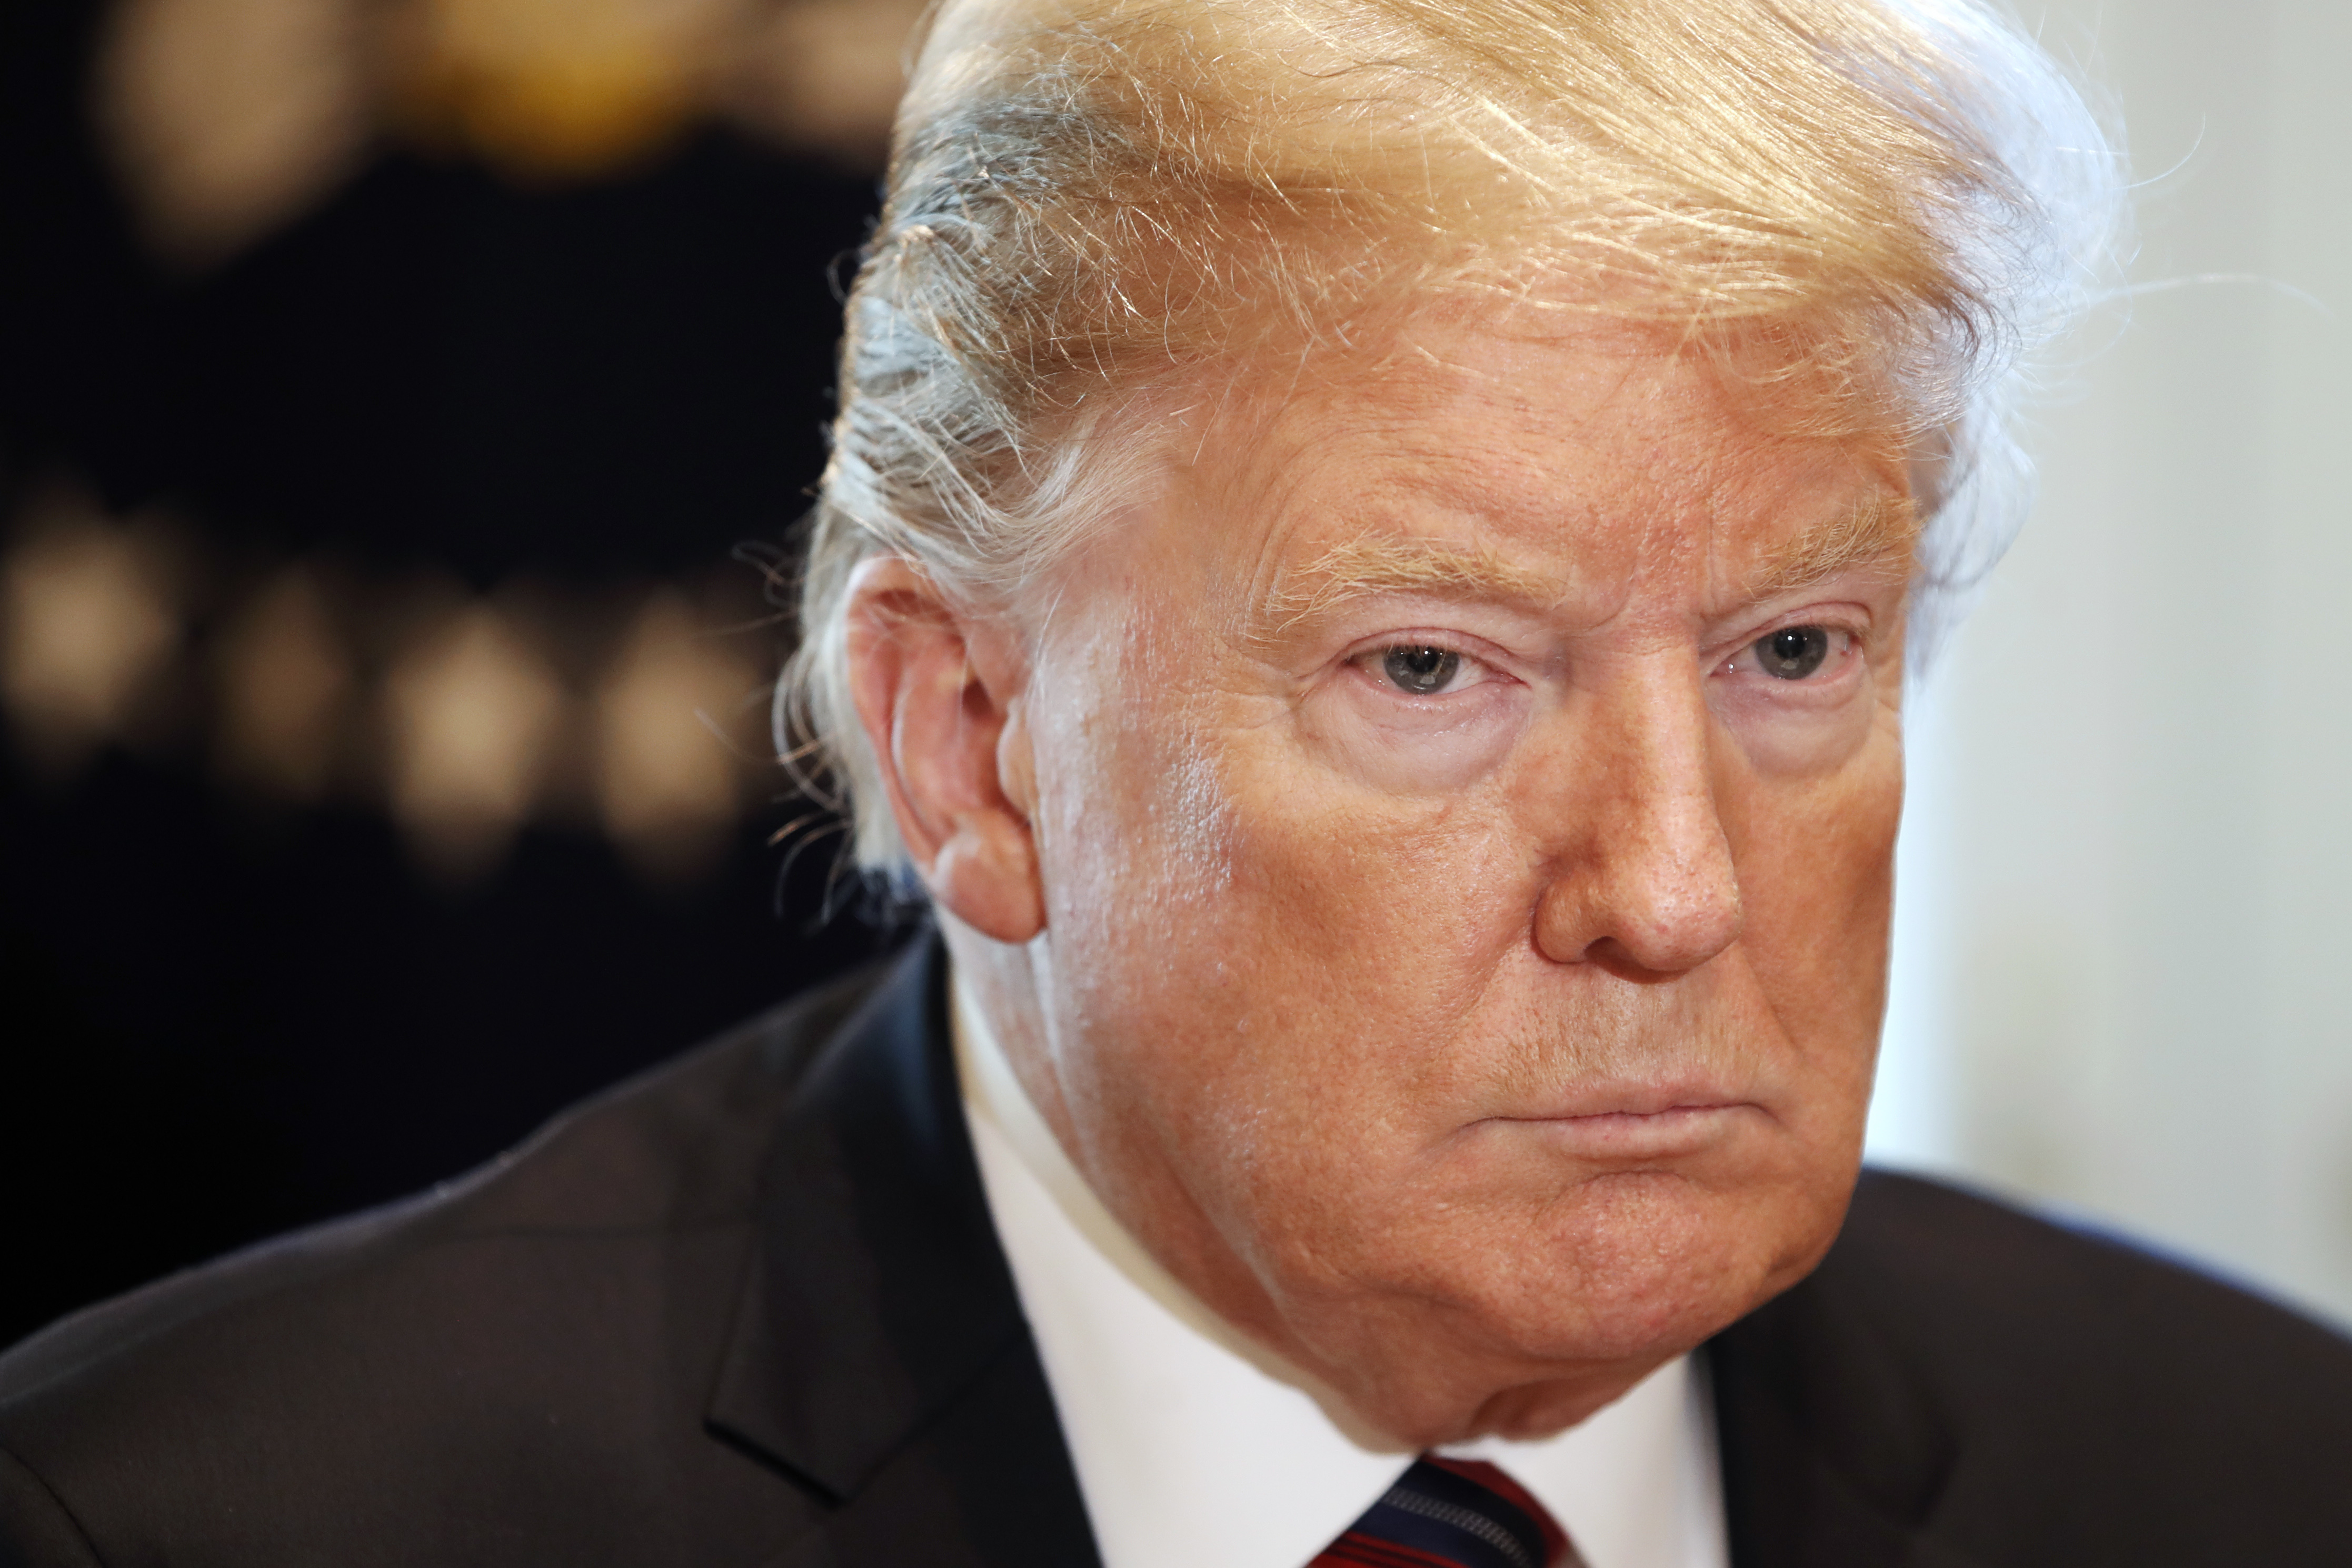 The President did not tip his hand on Saturday on whether he will move ahead with an emergency declaration that could break the impasse, free up money for his wall without congressional approval and kick off legal challenges and a political storm over the use of that extraordinary step. 